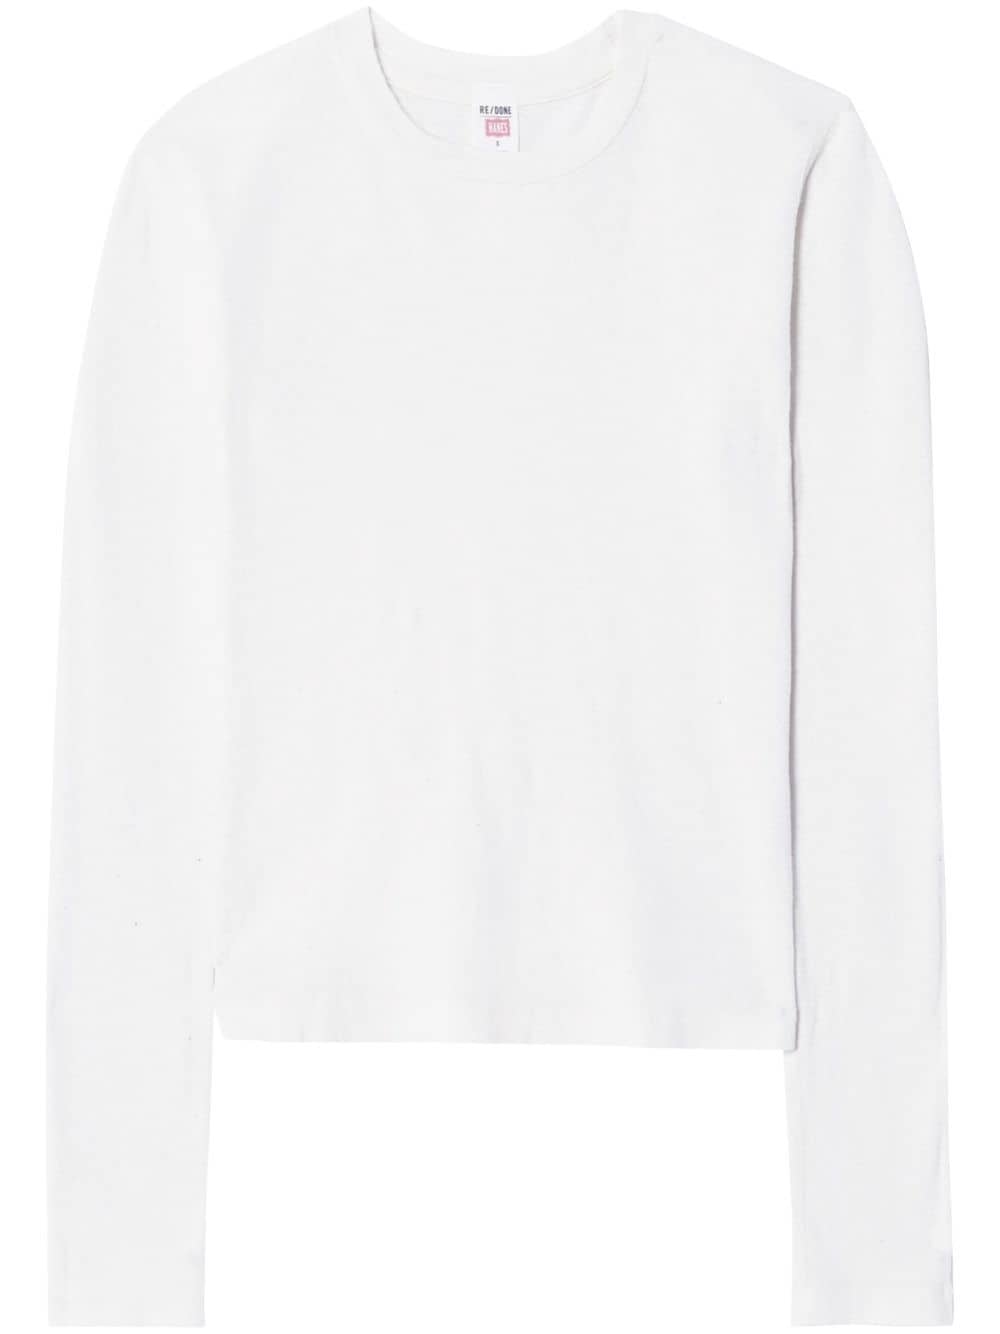 RE/DONE 90s Baby long-sleeve T-shirt - White von RE/DONE